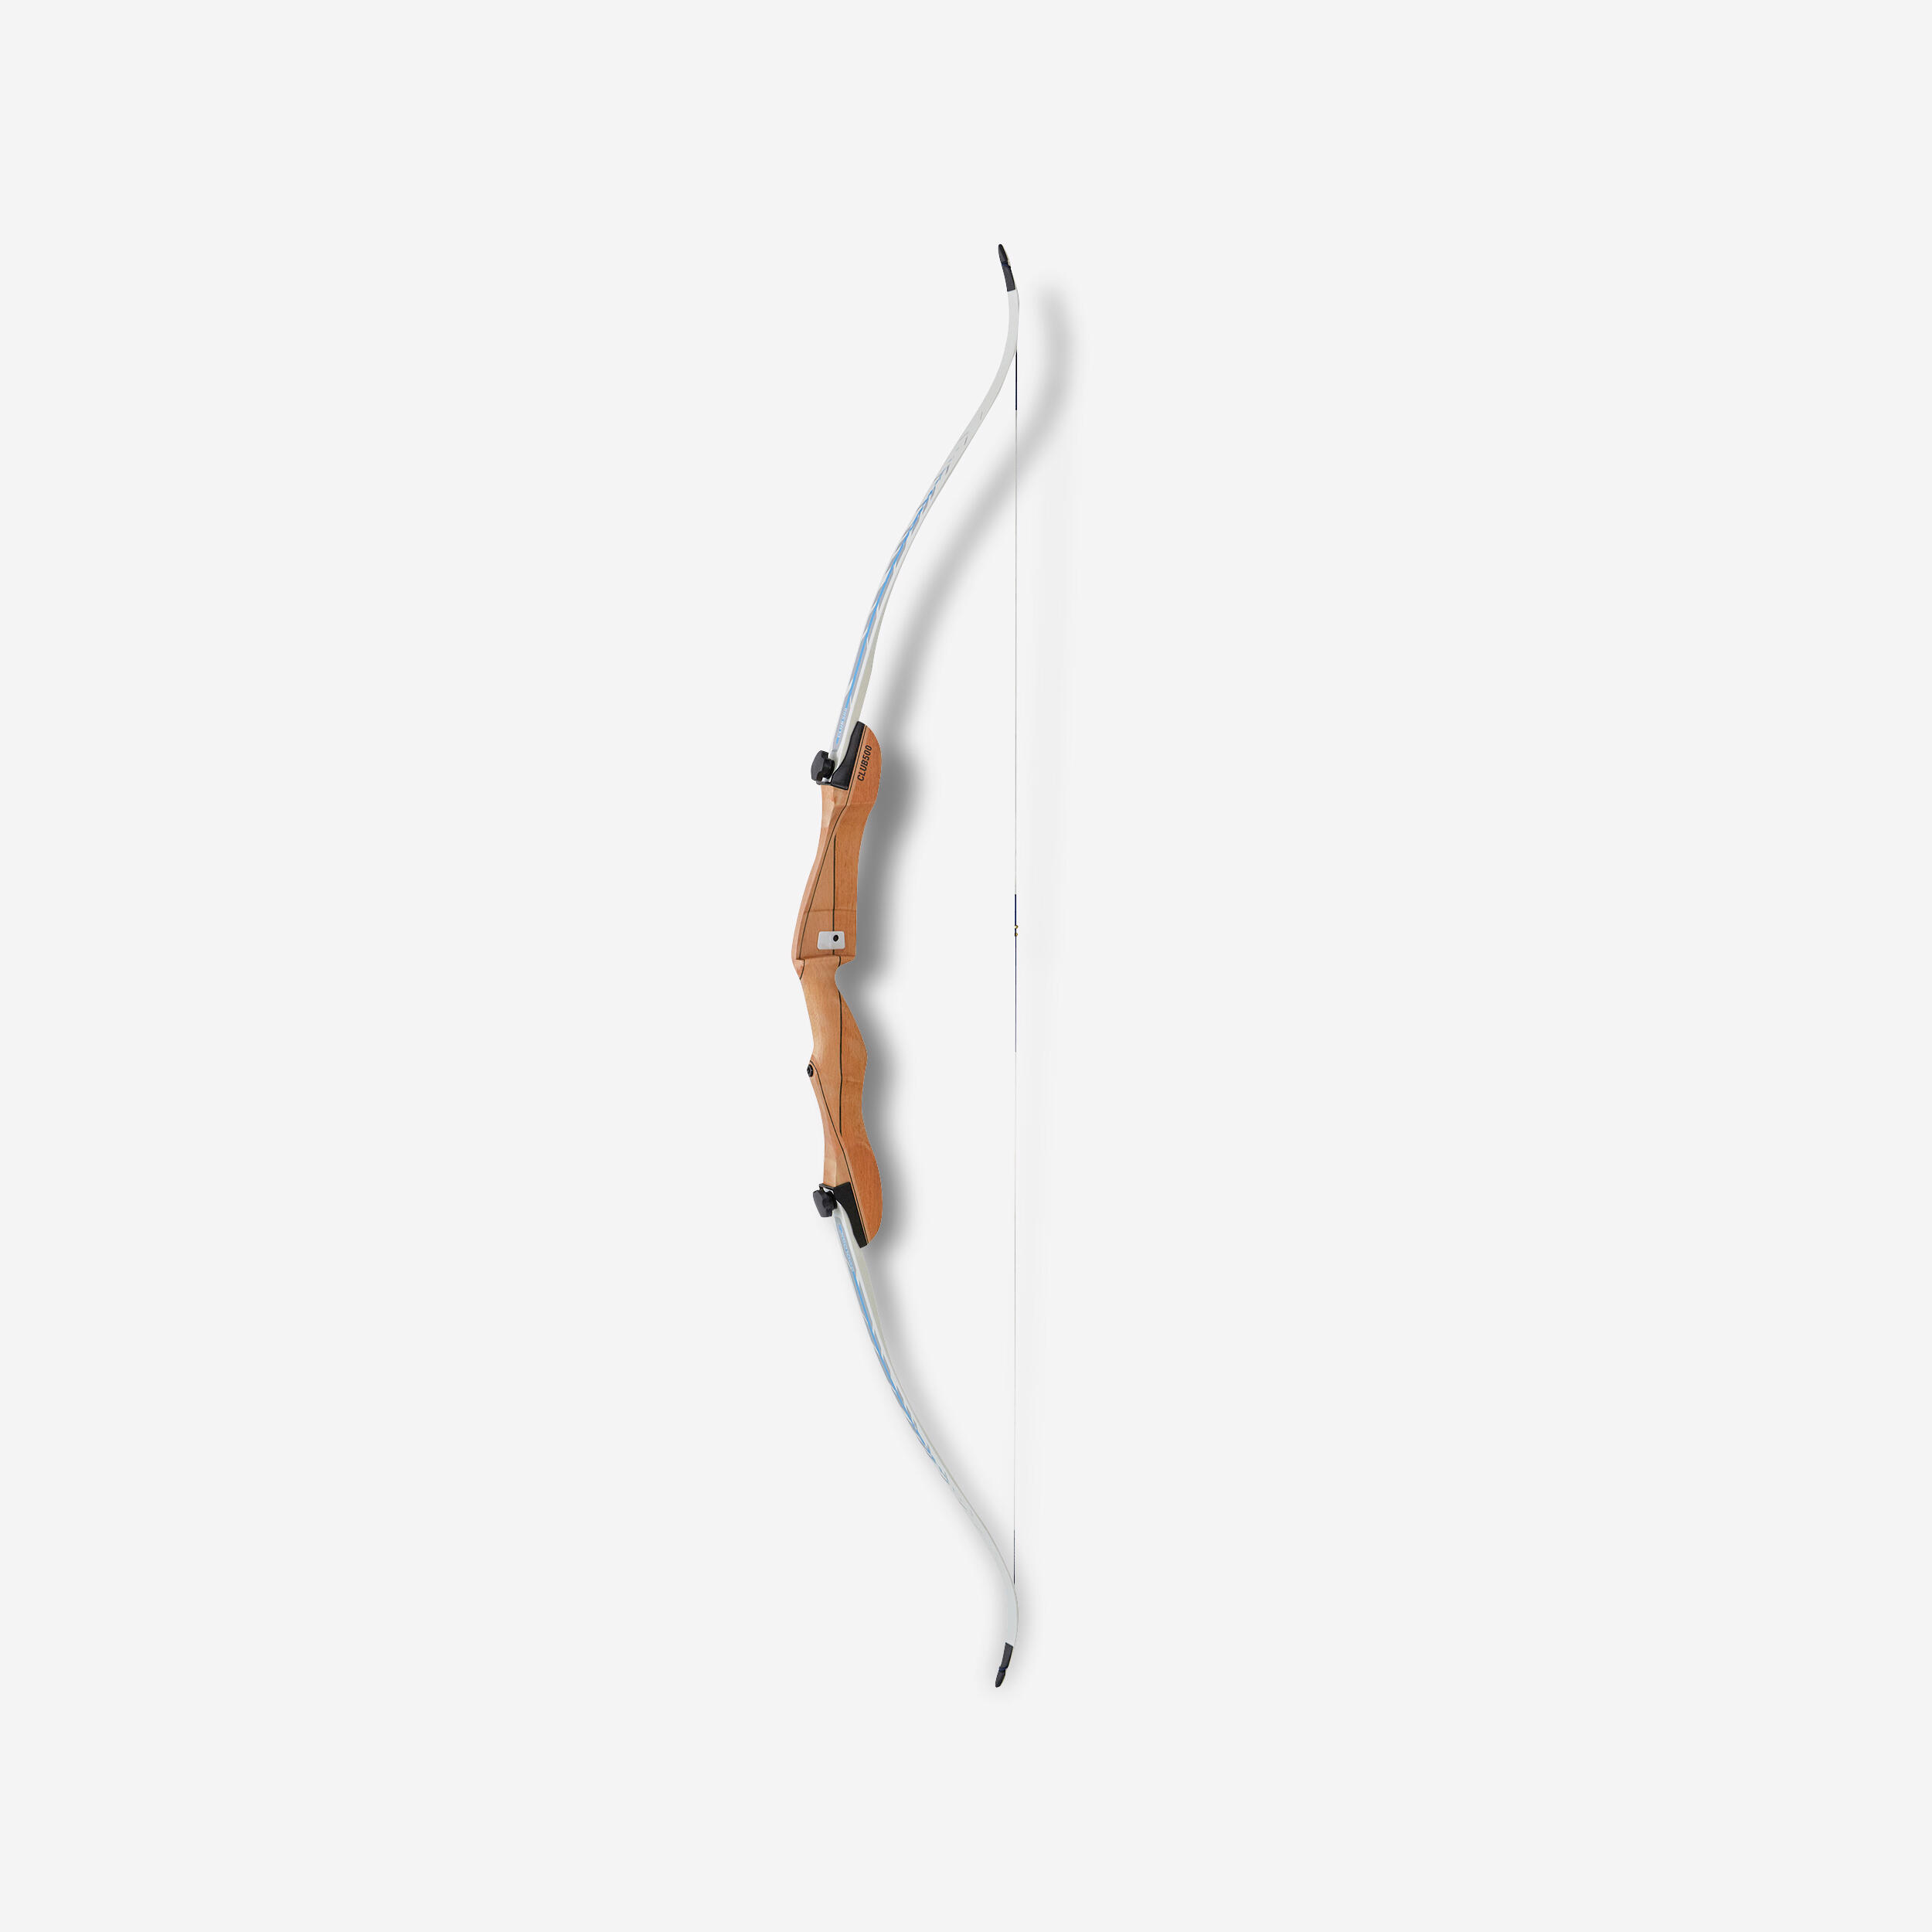 Buy Archery Bows Online in India